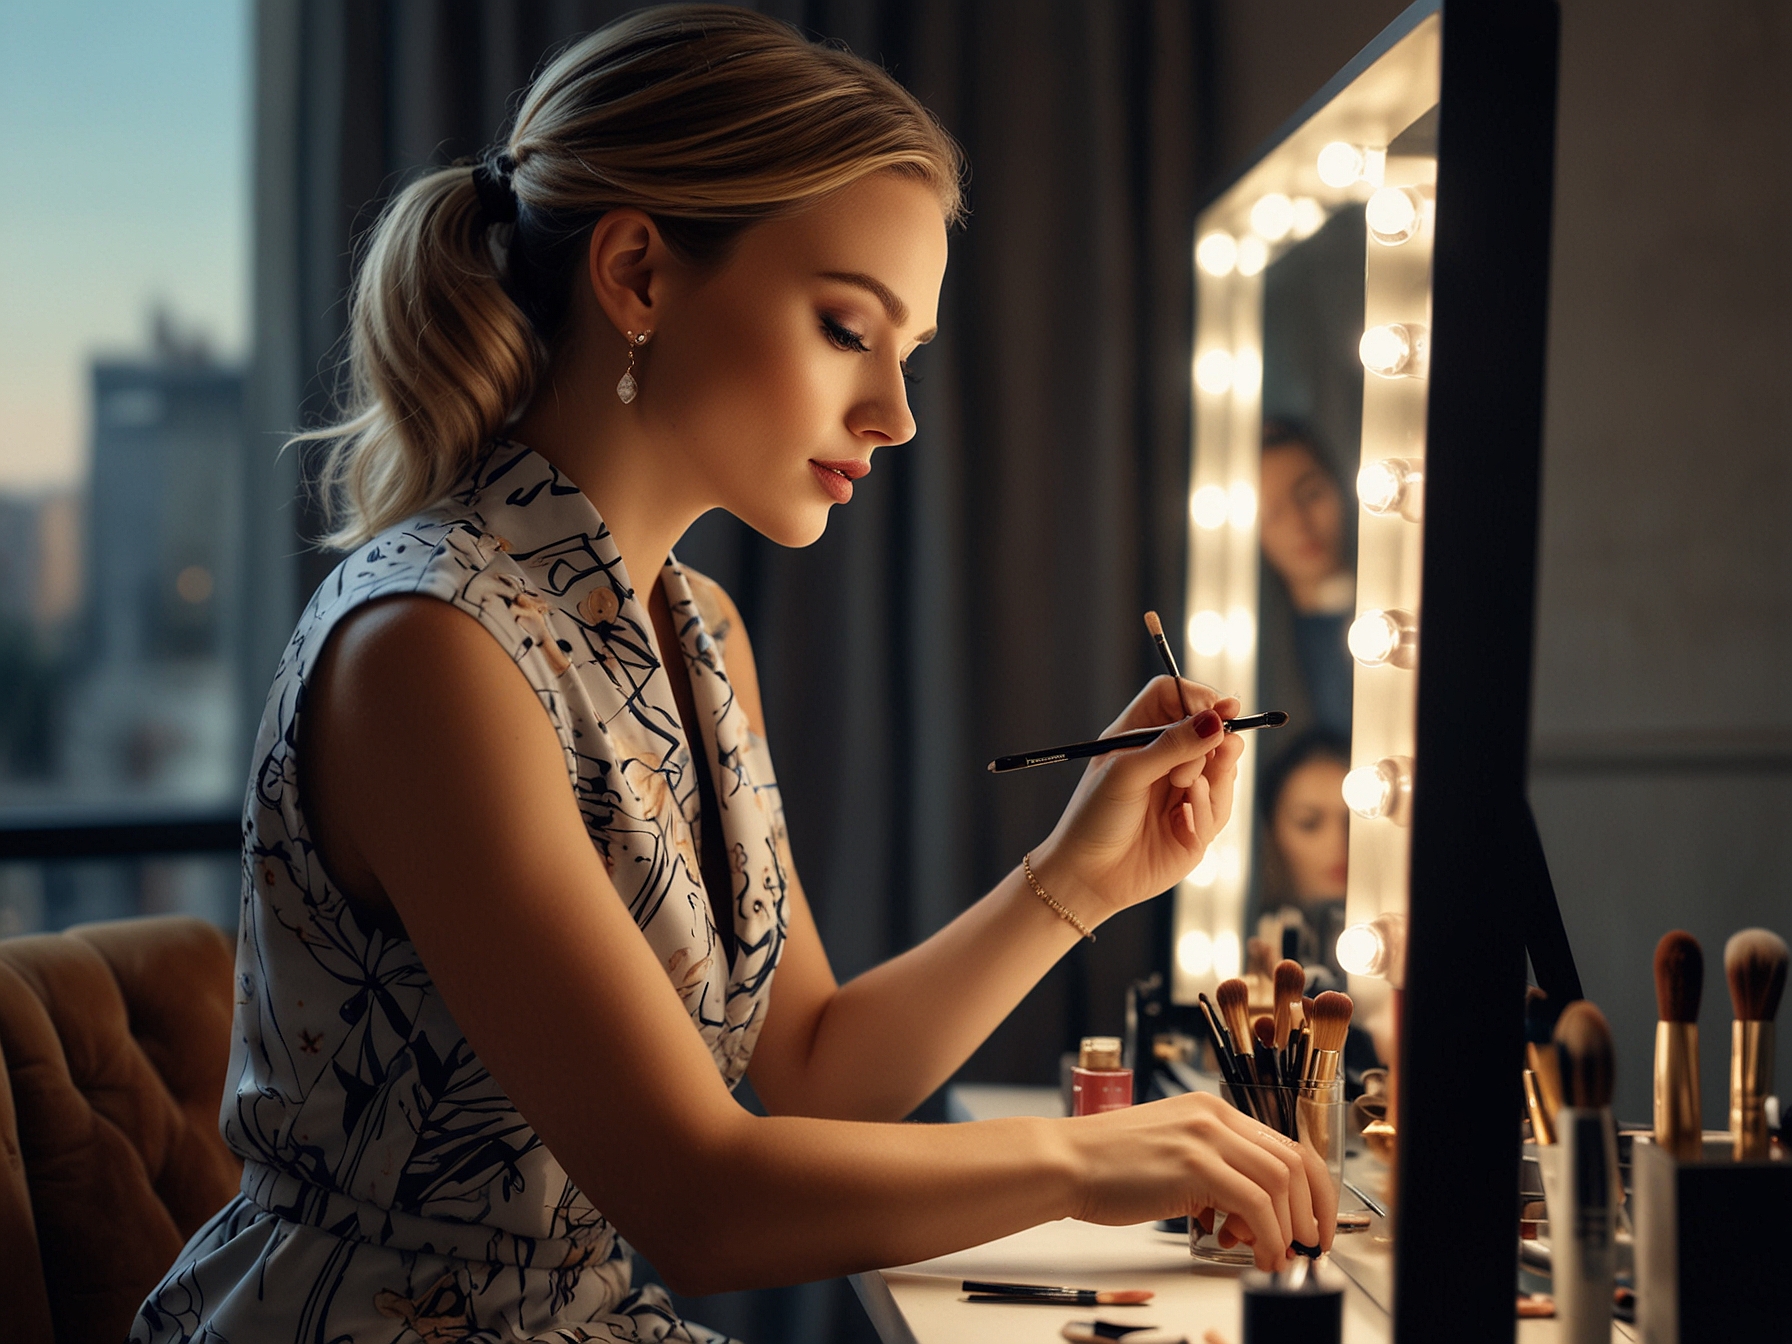 Aoife McGregor, in a stylish designer outfit, expertly applying makeup to a model, illustrating her professional skills and glamorous lifestyle.